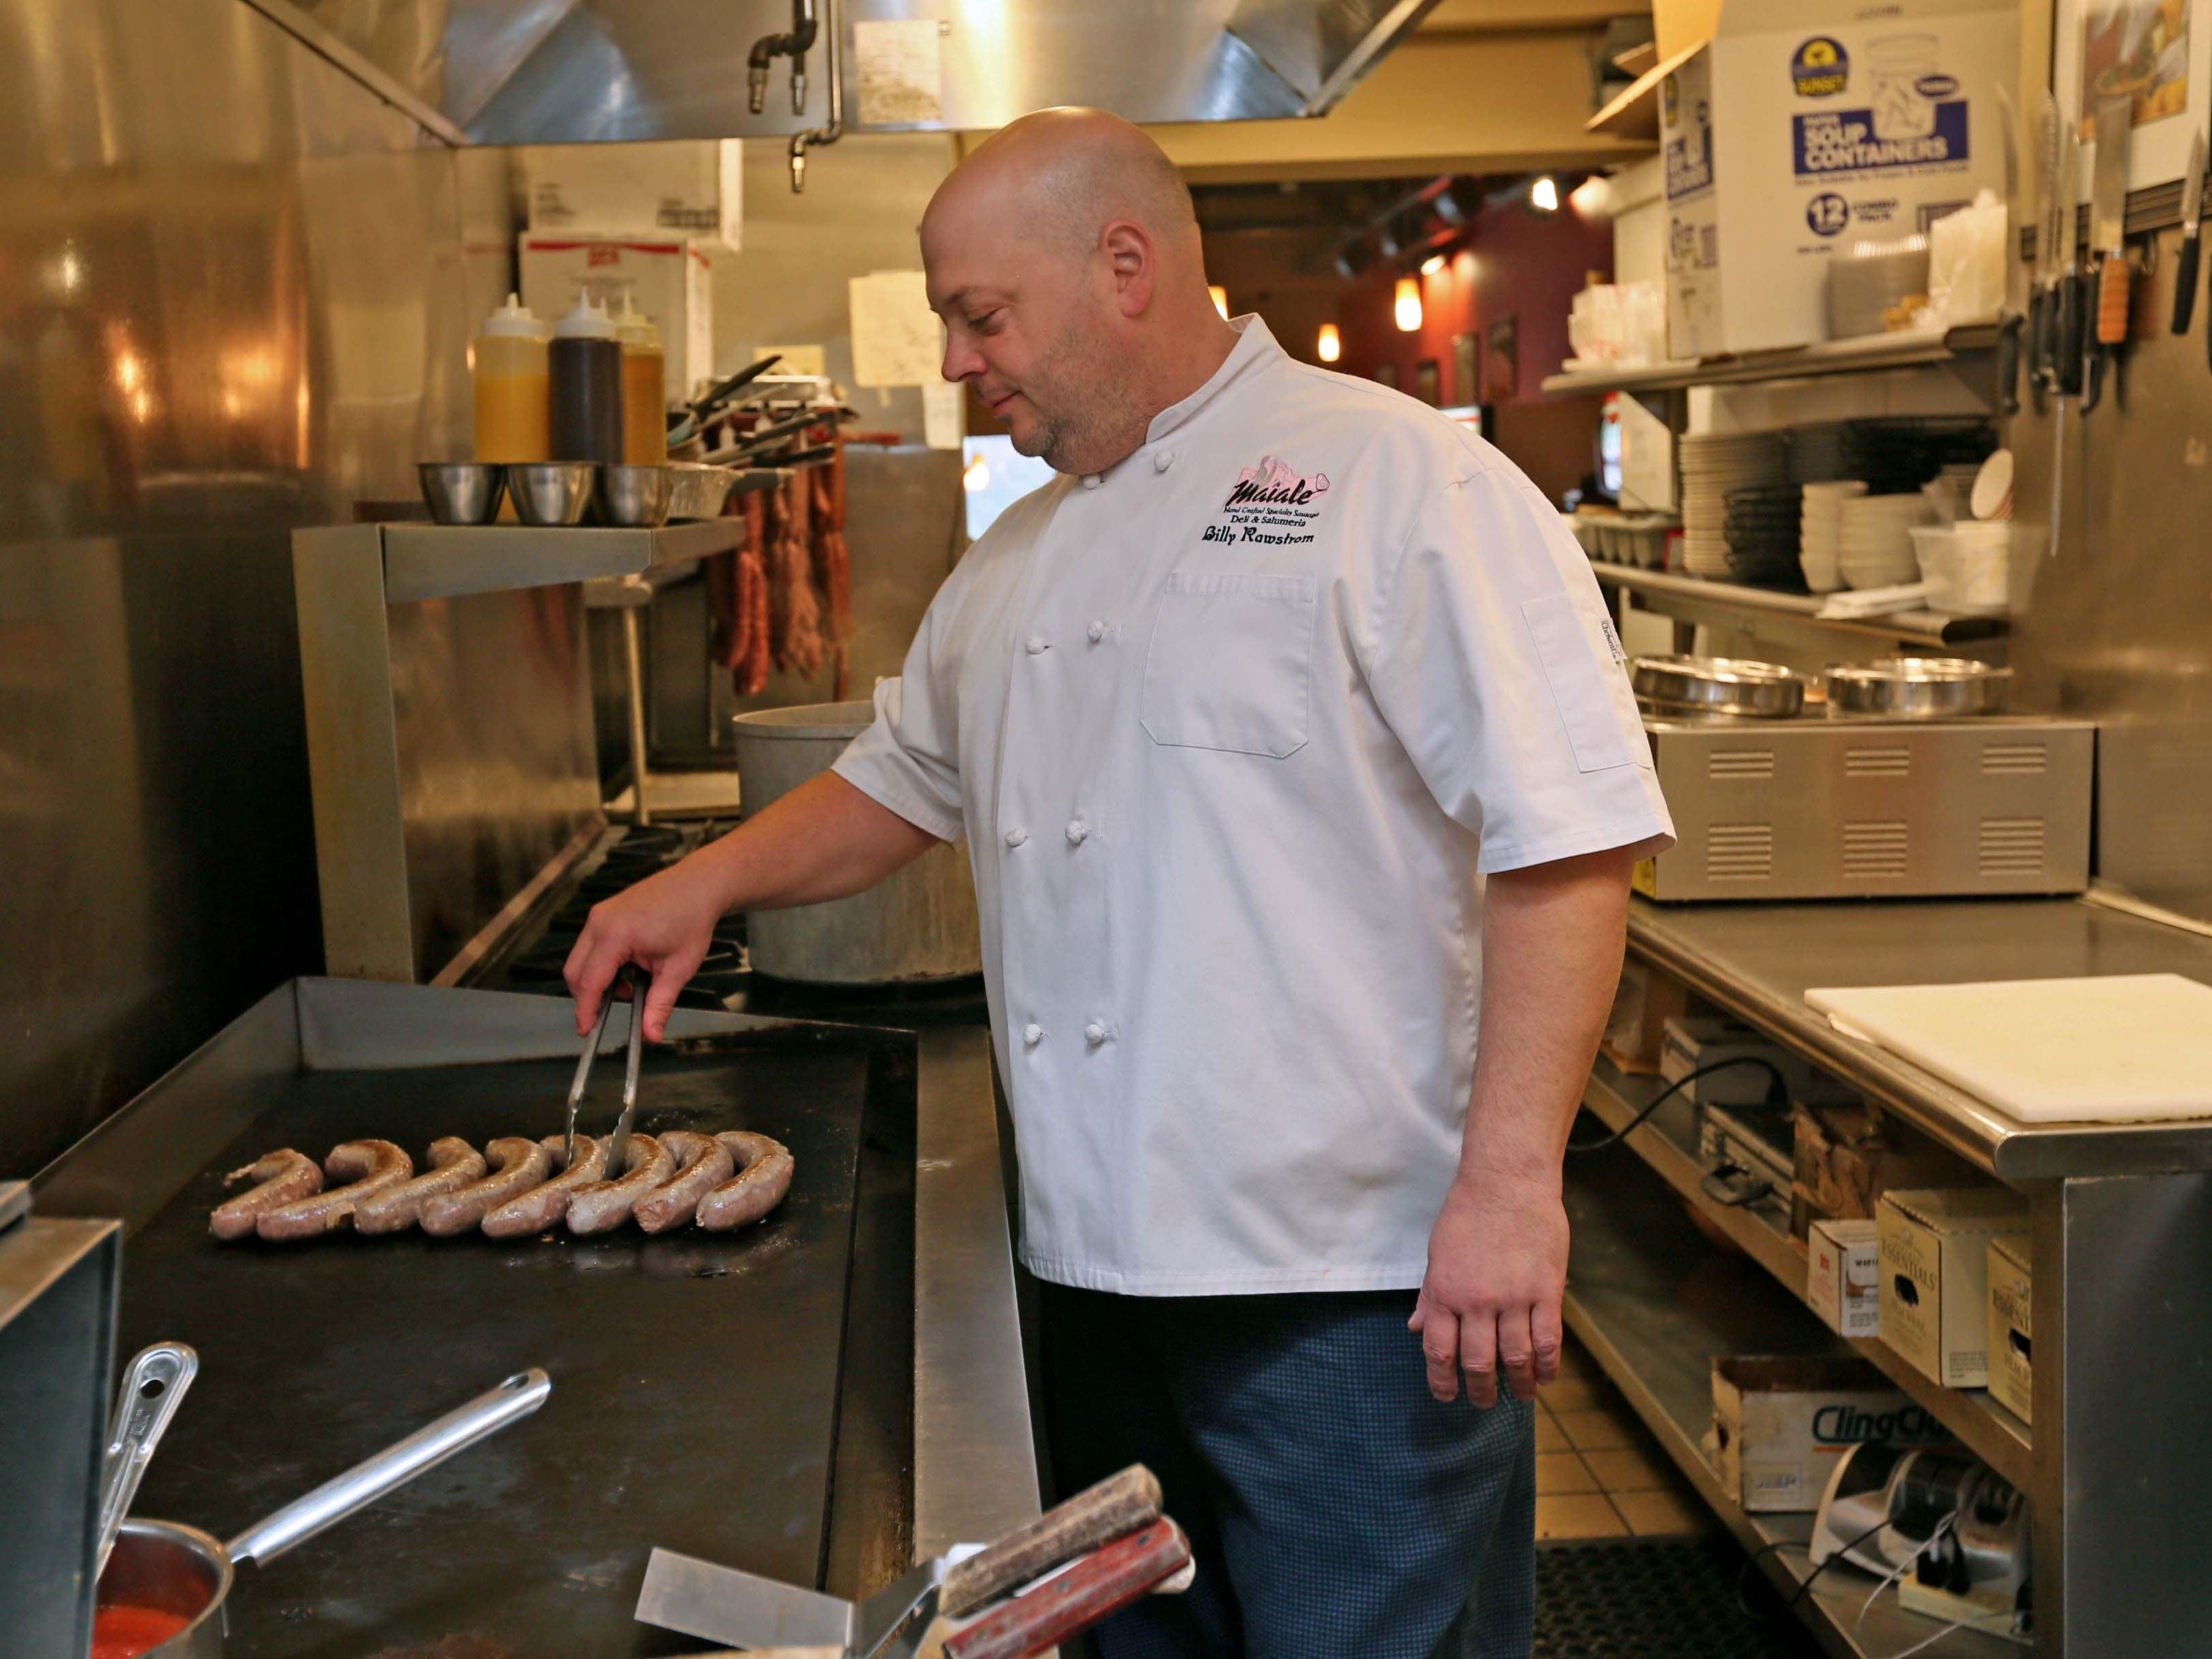 Billy Rawstrom, owner of Maiale Deli and Salumeria, put some  sausage on the grill at his deli in the Cannery Shopping Center. The popular shop has been featured on the Food Network series "Diners, Drive-ins and Dives."